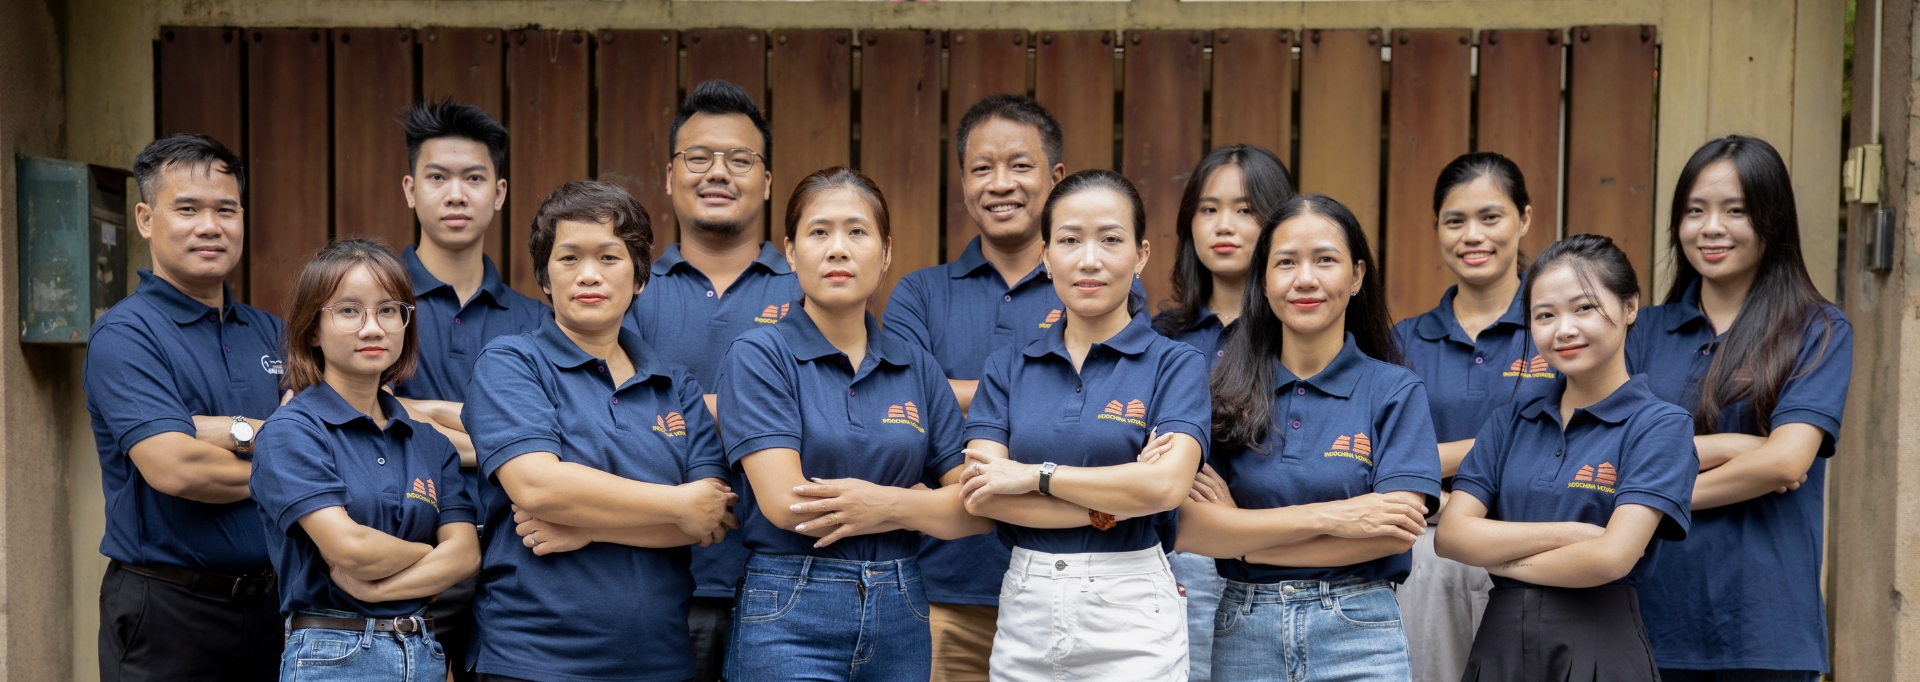 Welcome to meet our Indochina Voyages Team 2.